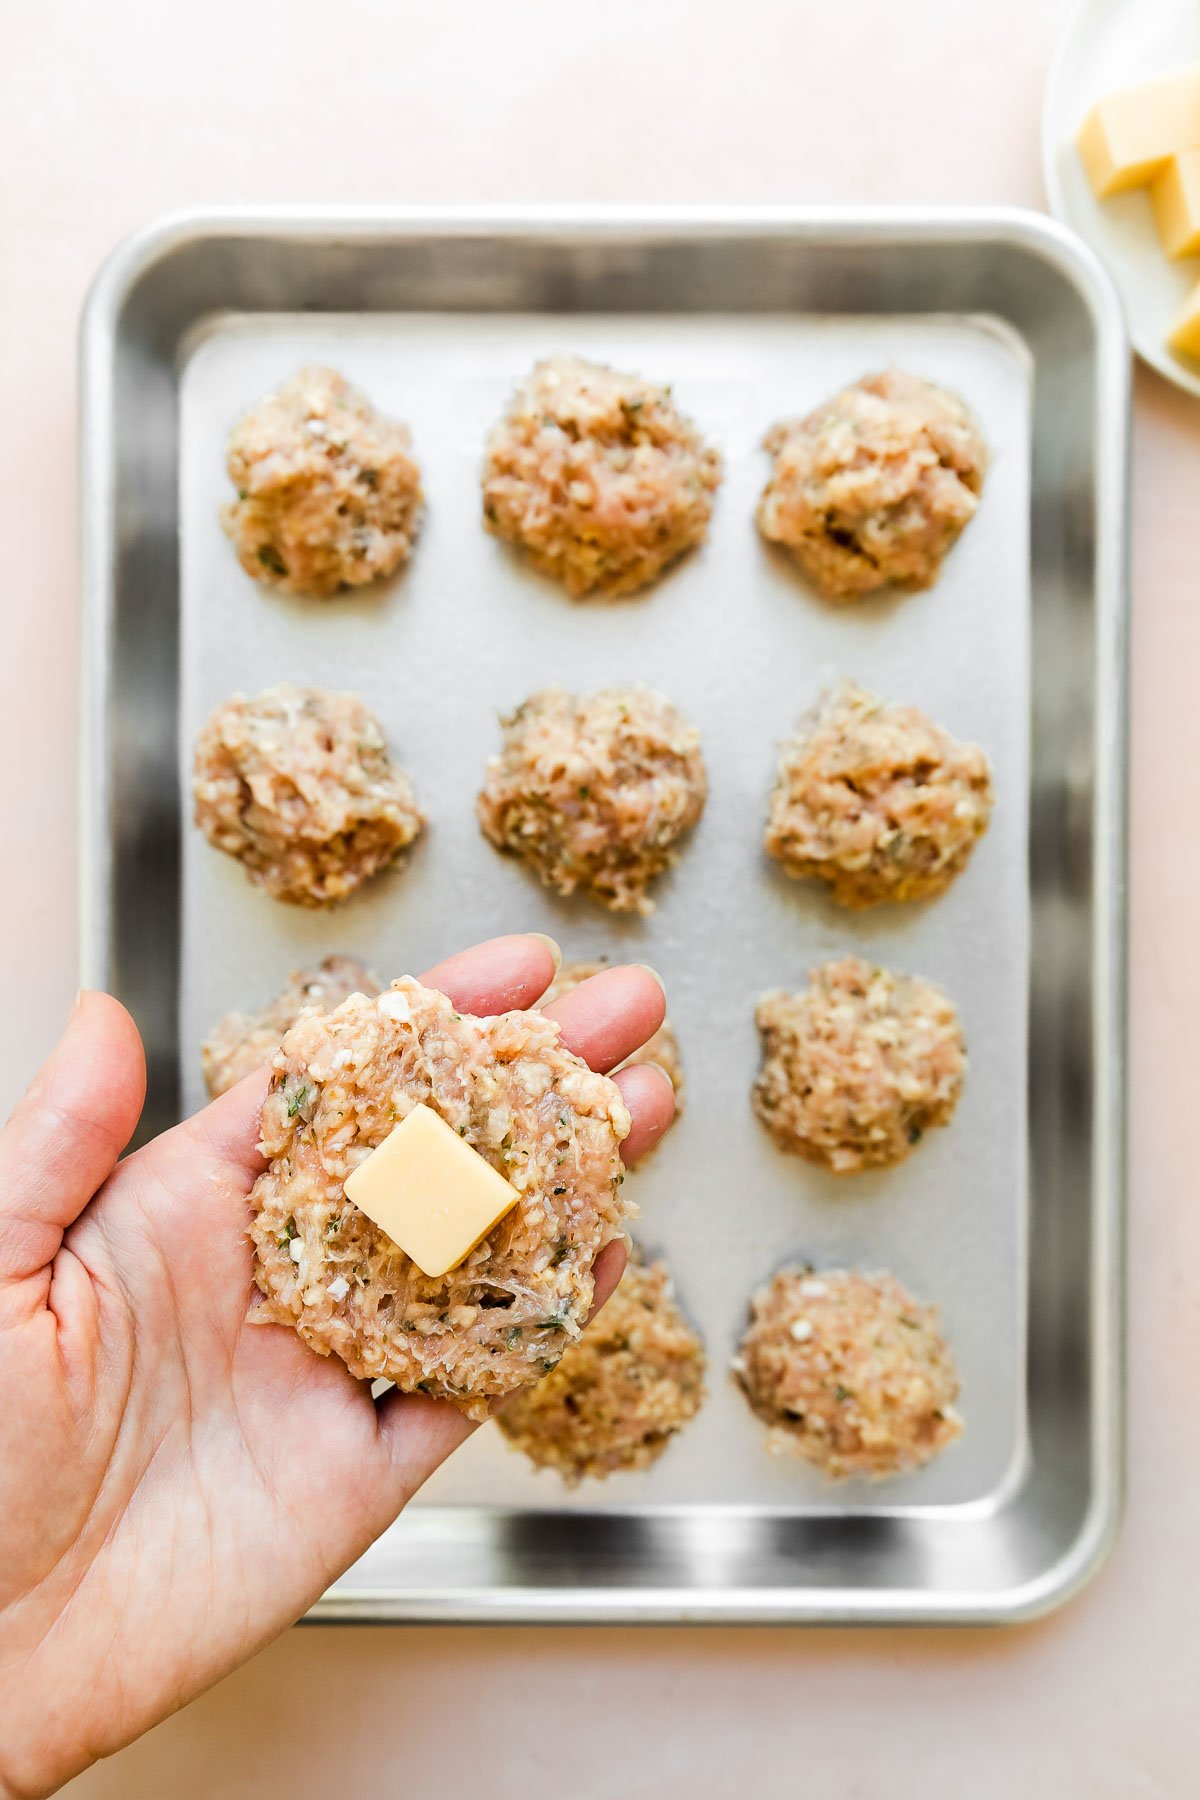 A woman's hand holds a small patty of chicken meatball mixture with a cube of gruyère cheese placed in the center above a pan of formed gruyère cheese stuffed chicken meatballs. The baking sheet sits atop a light pink surface with a small white plate of gruyère cheese cubes sitting alongside.